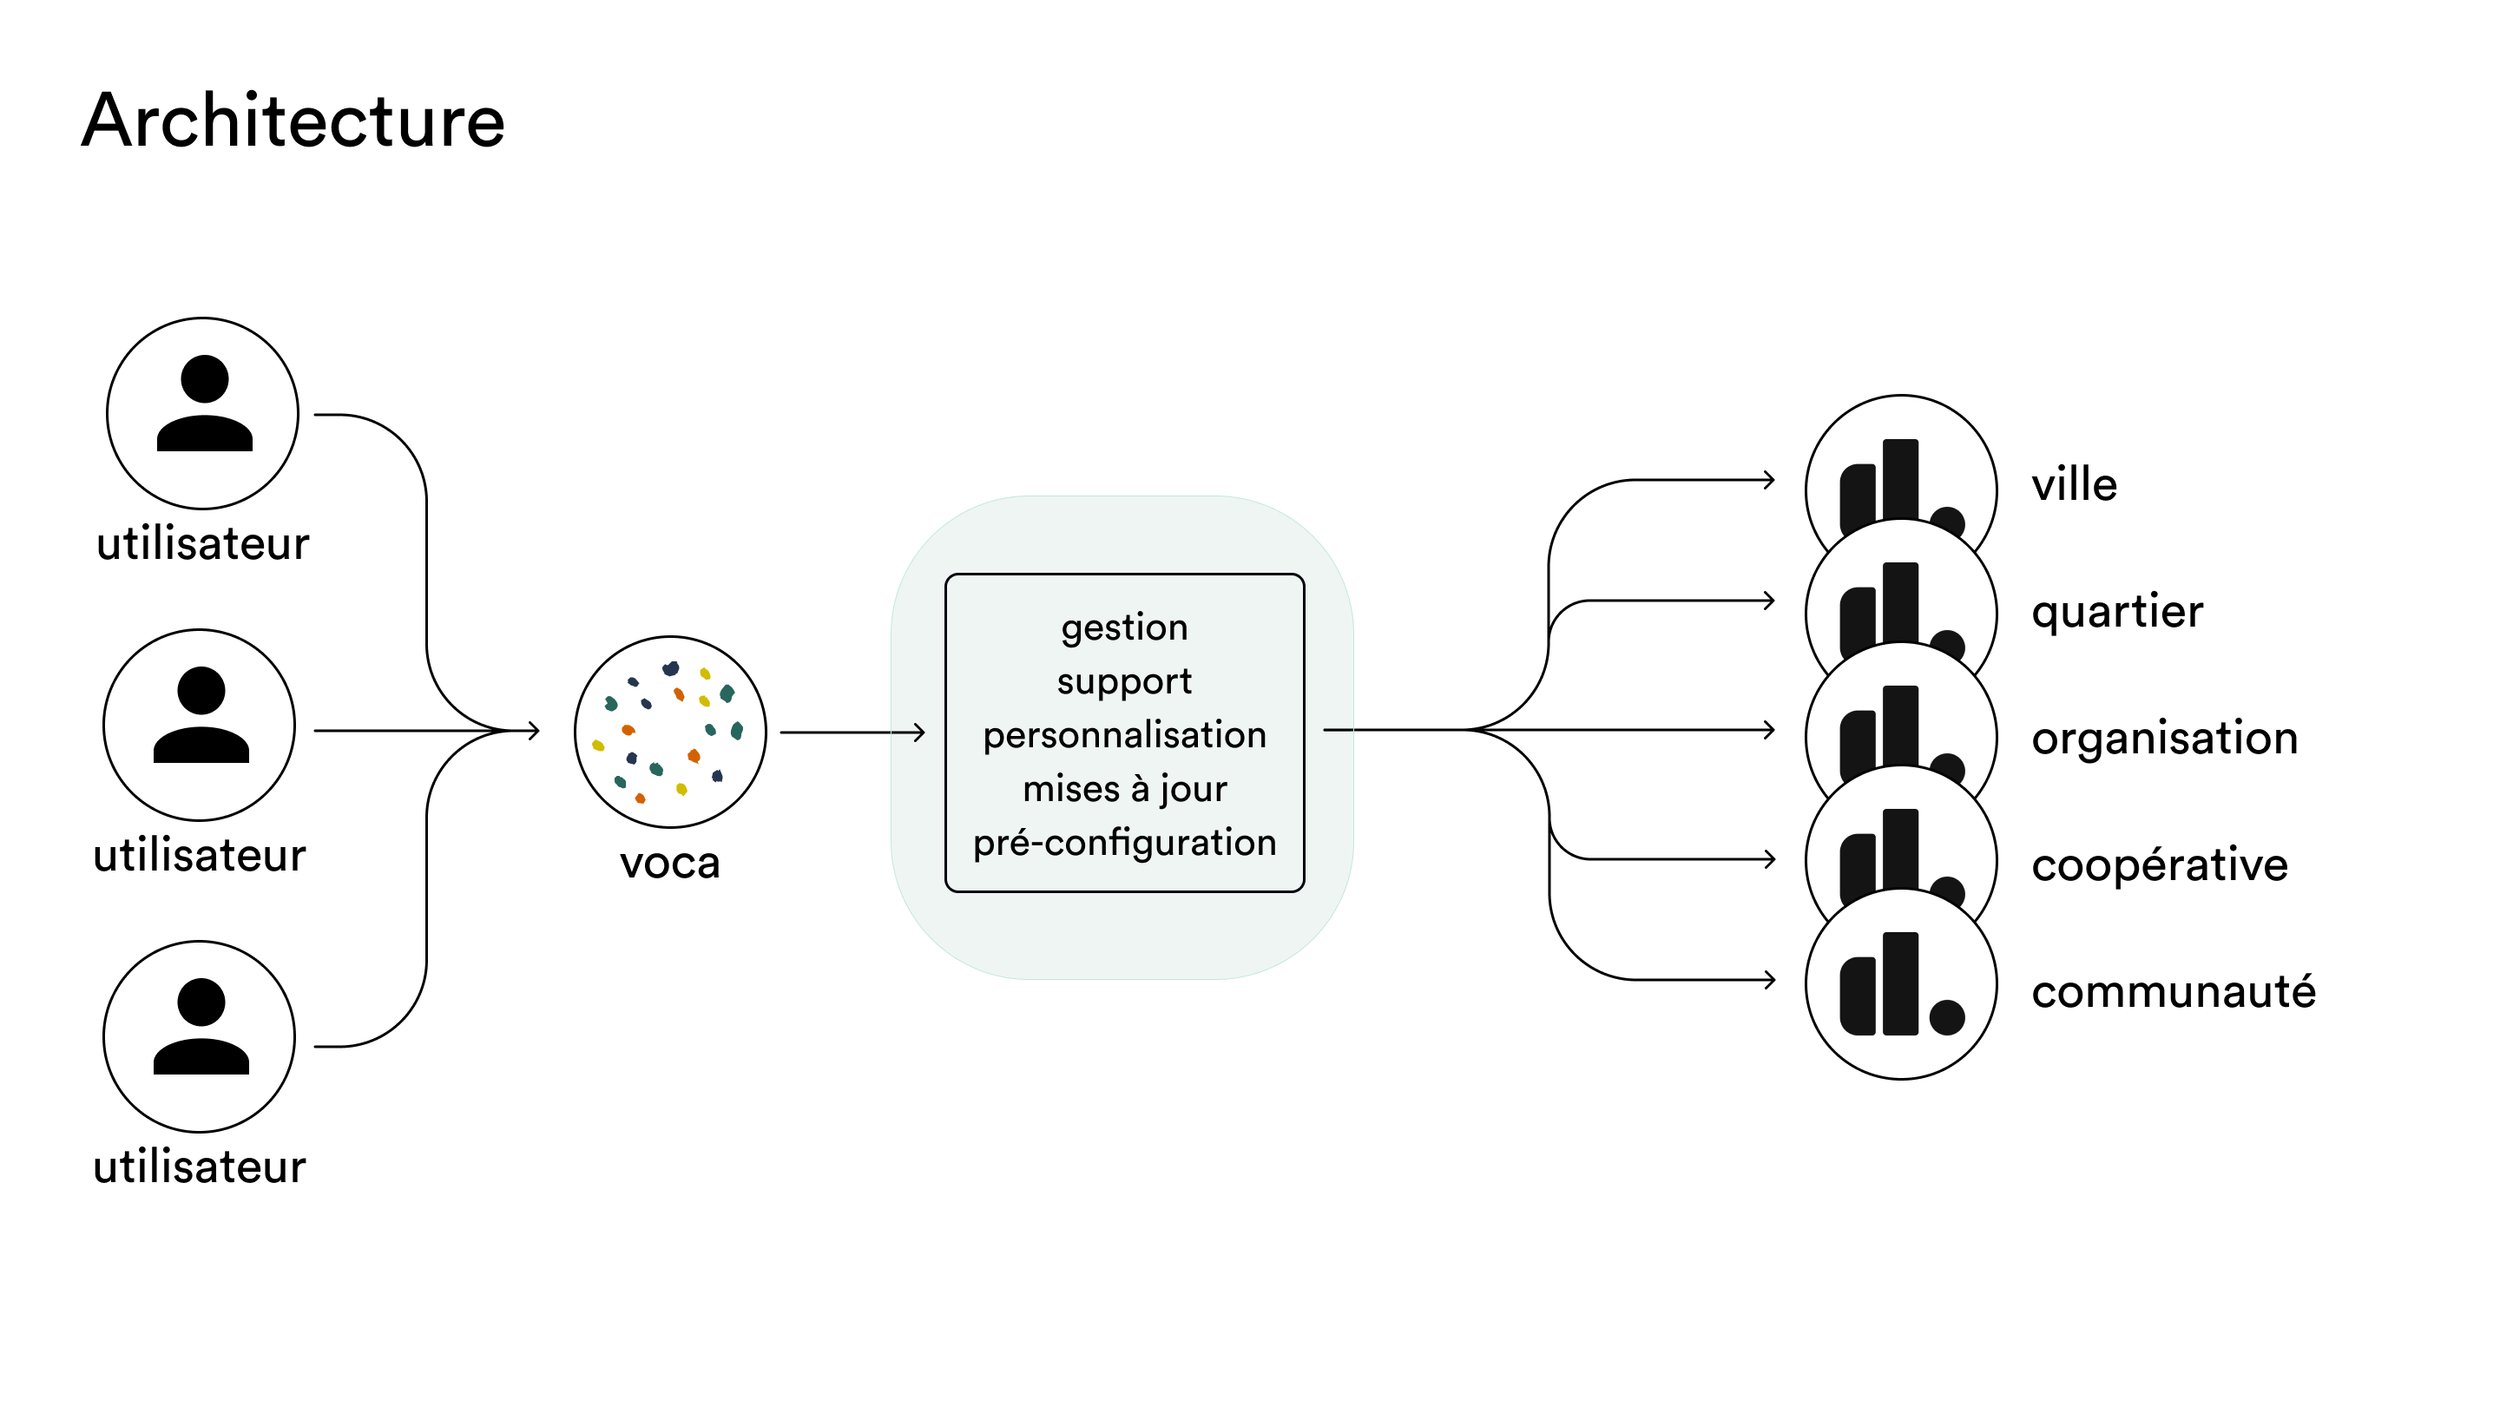  Voca enables the deployment of decidim in a easy and stable way to setup your participatory democracy platform in minutes, no technical knowledge needed, full support. 